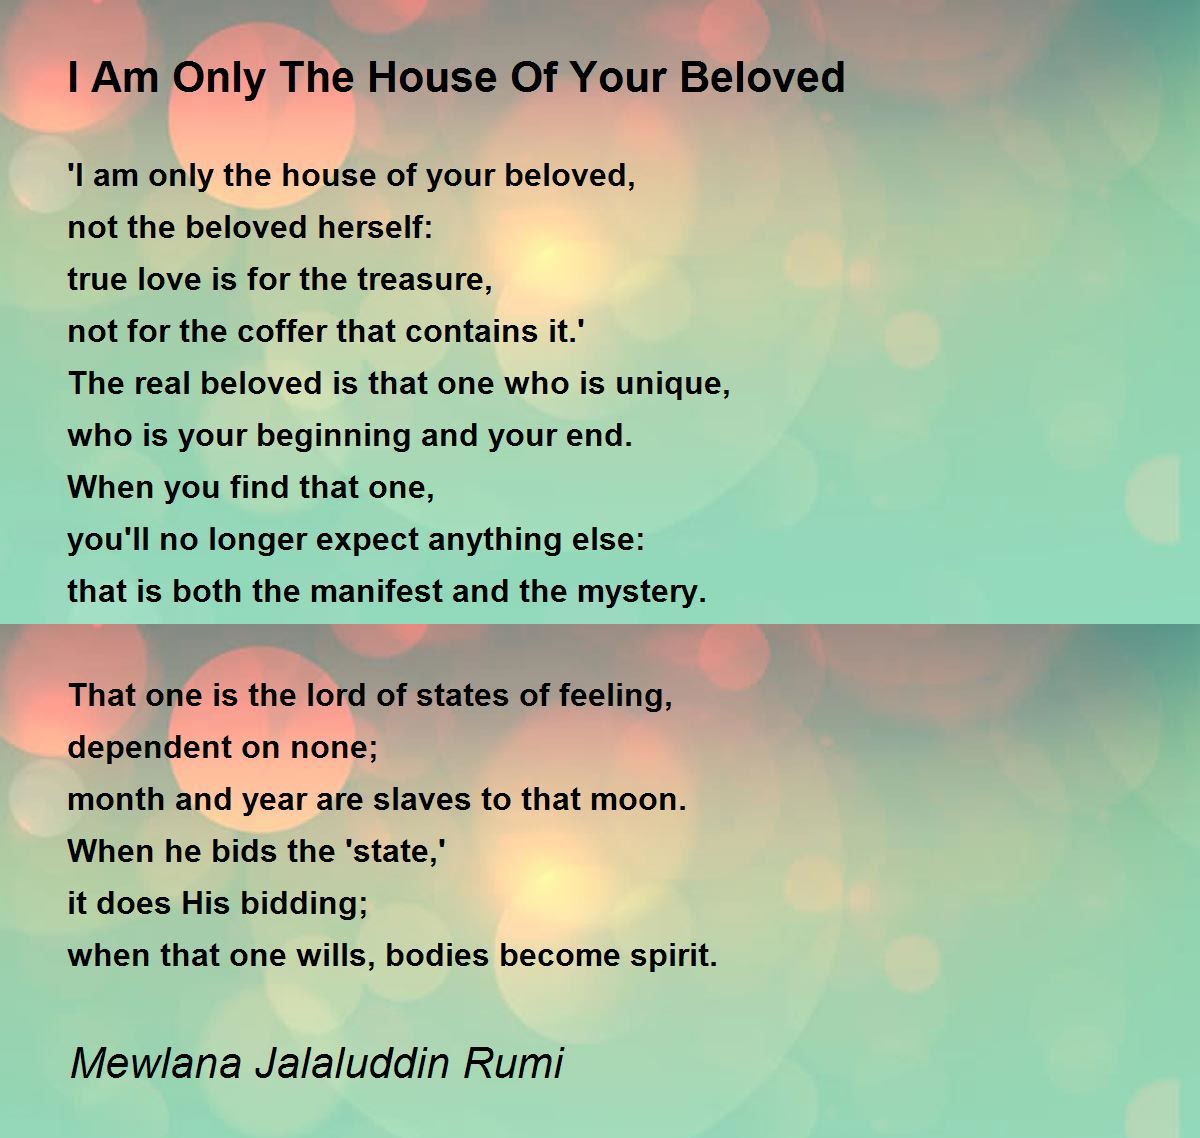 I Am Only The House Of Your Beloved Poem by Mewlana 